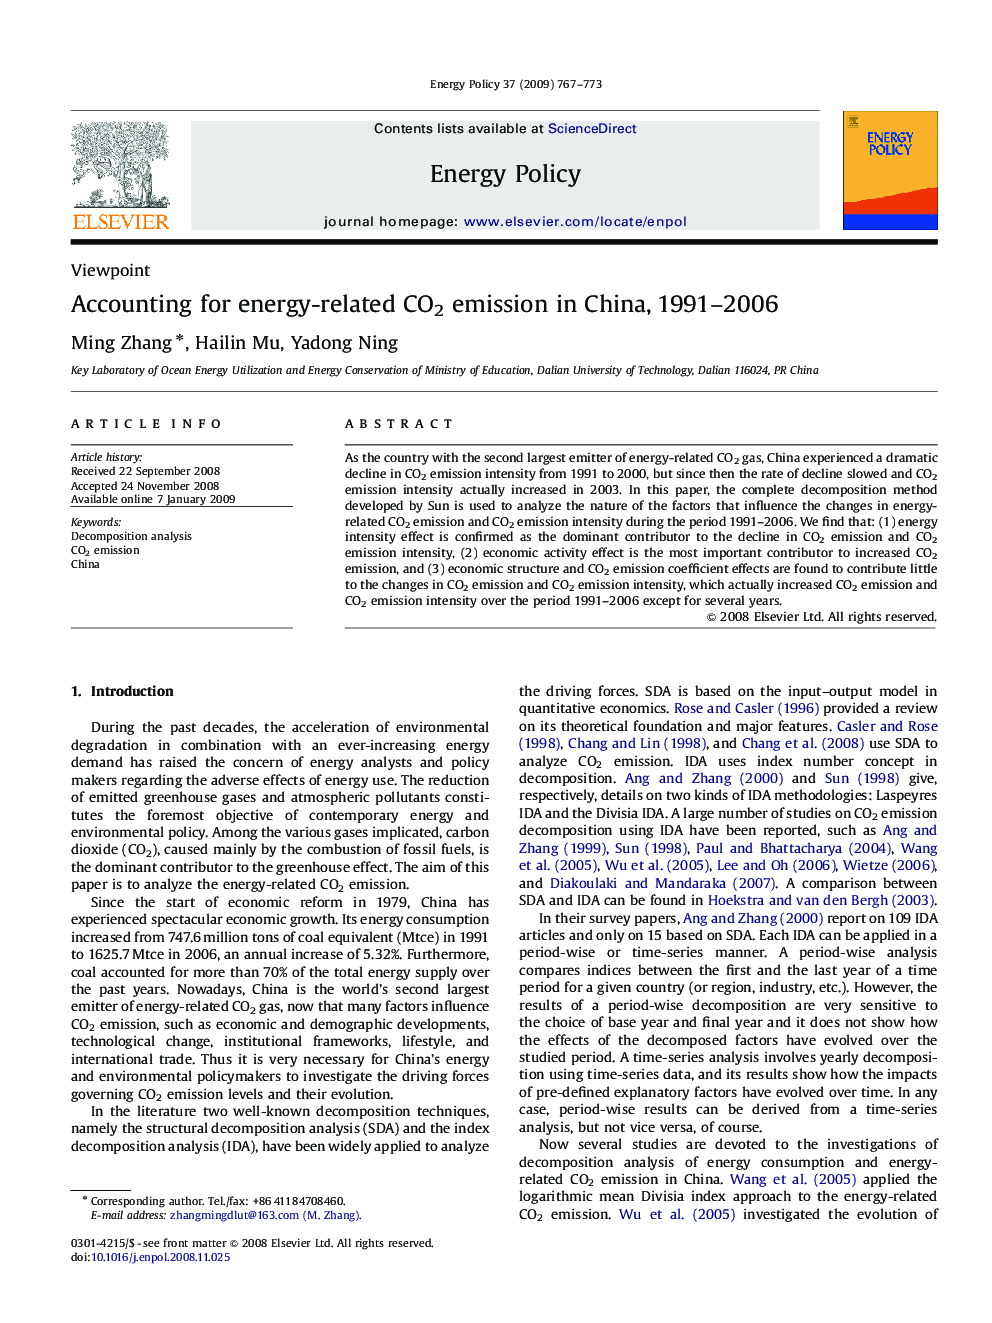 Accounting for energy-related CO2 emission in China, 1991–2006